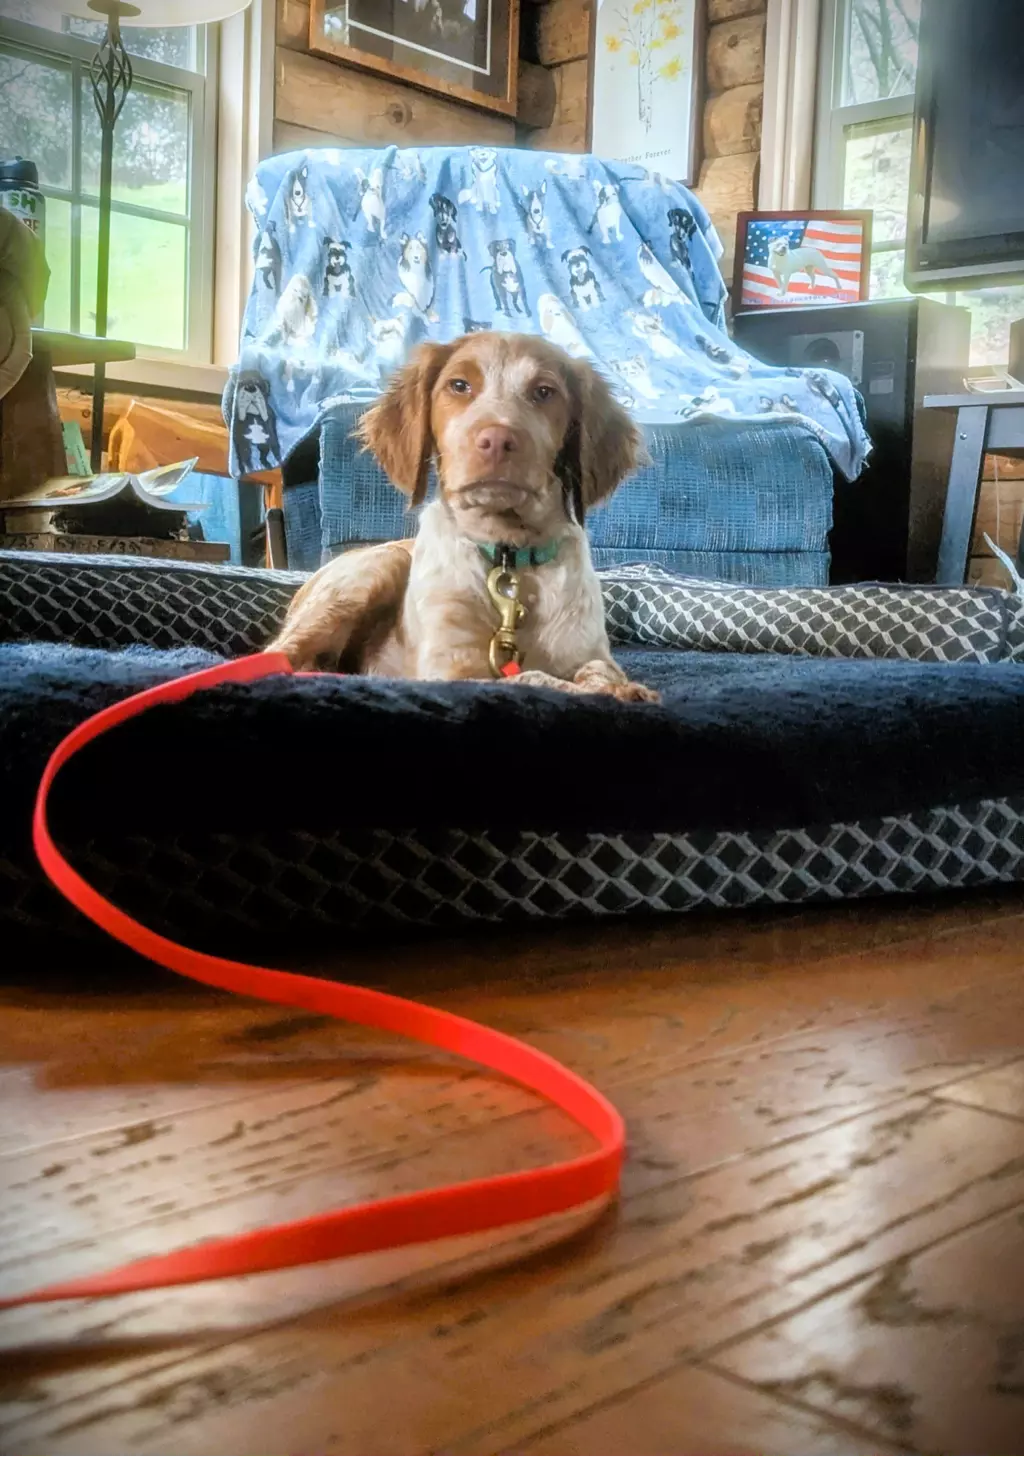 Puppy laying on bed with red leash inside cozy home.